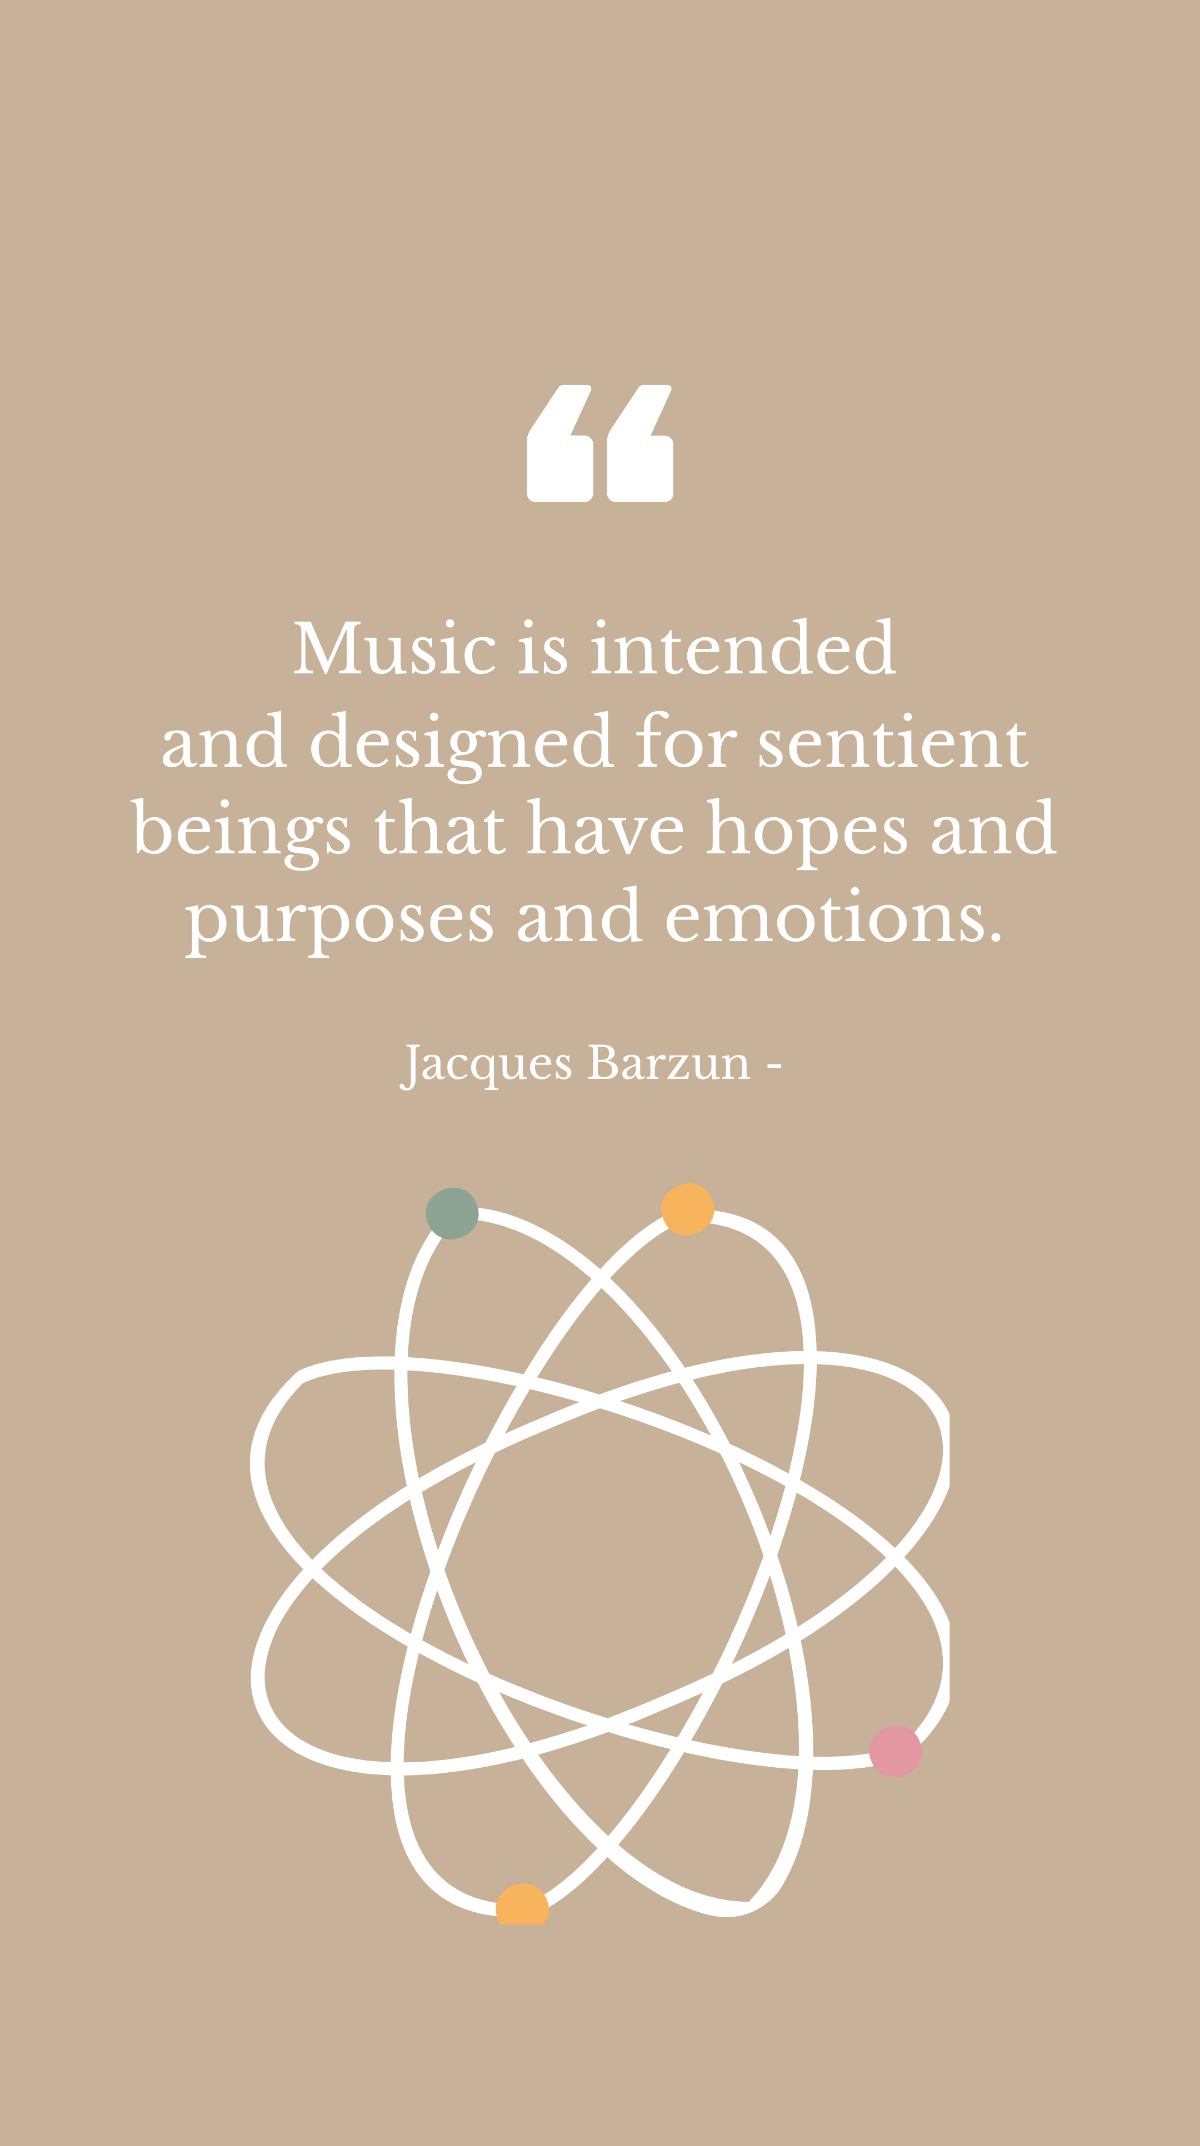 Jacques Barzun - Music is intended and designed for sentient beings that have hopes and purposes and emotions. Template